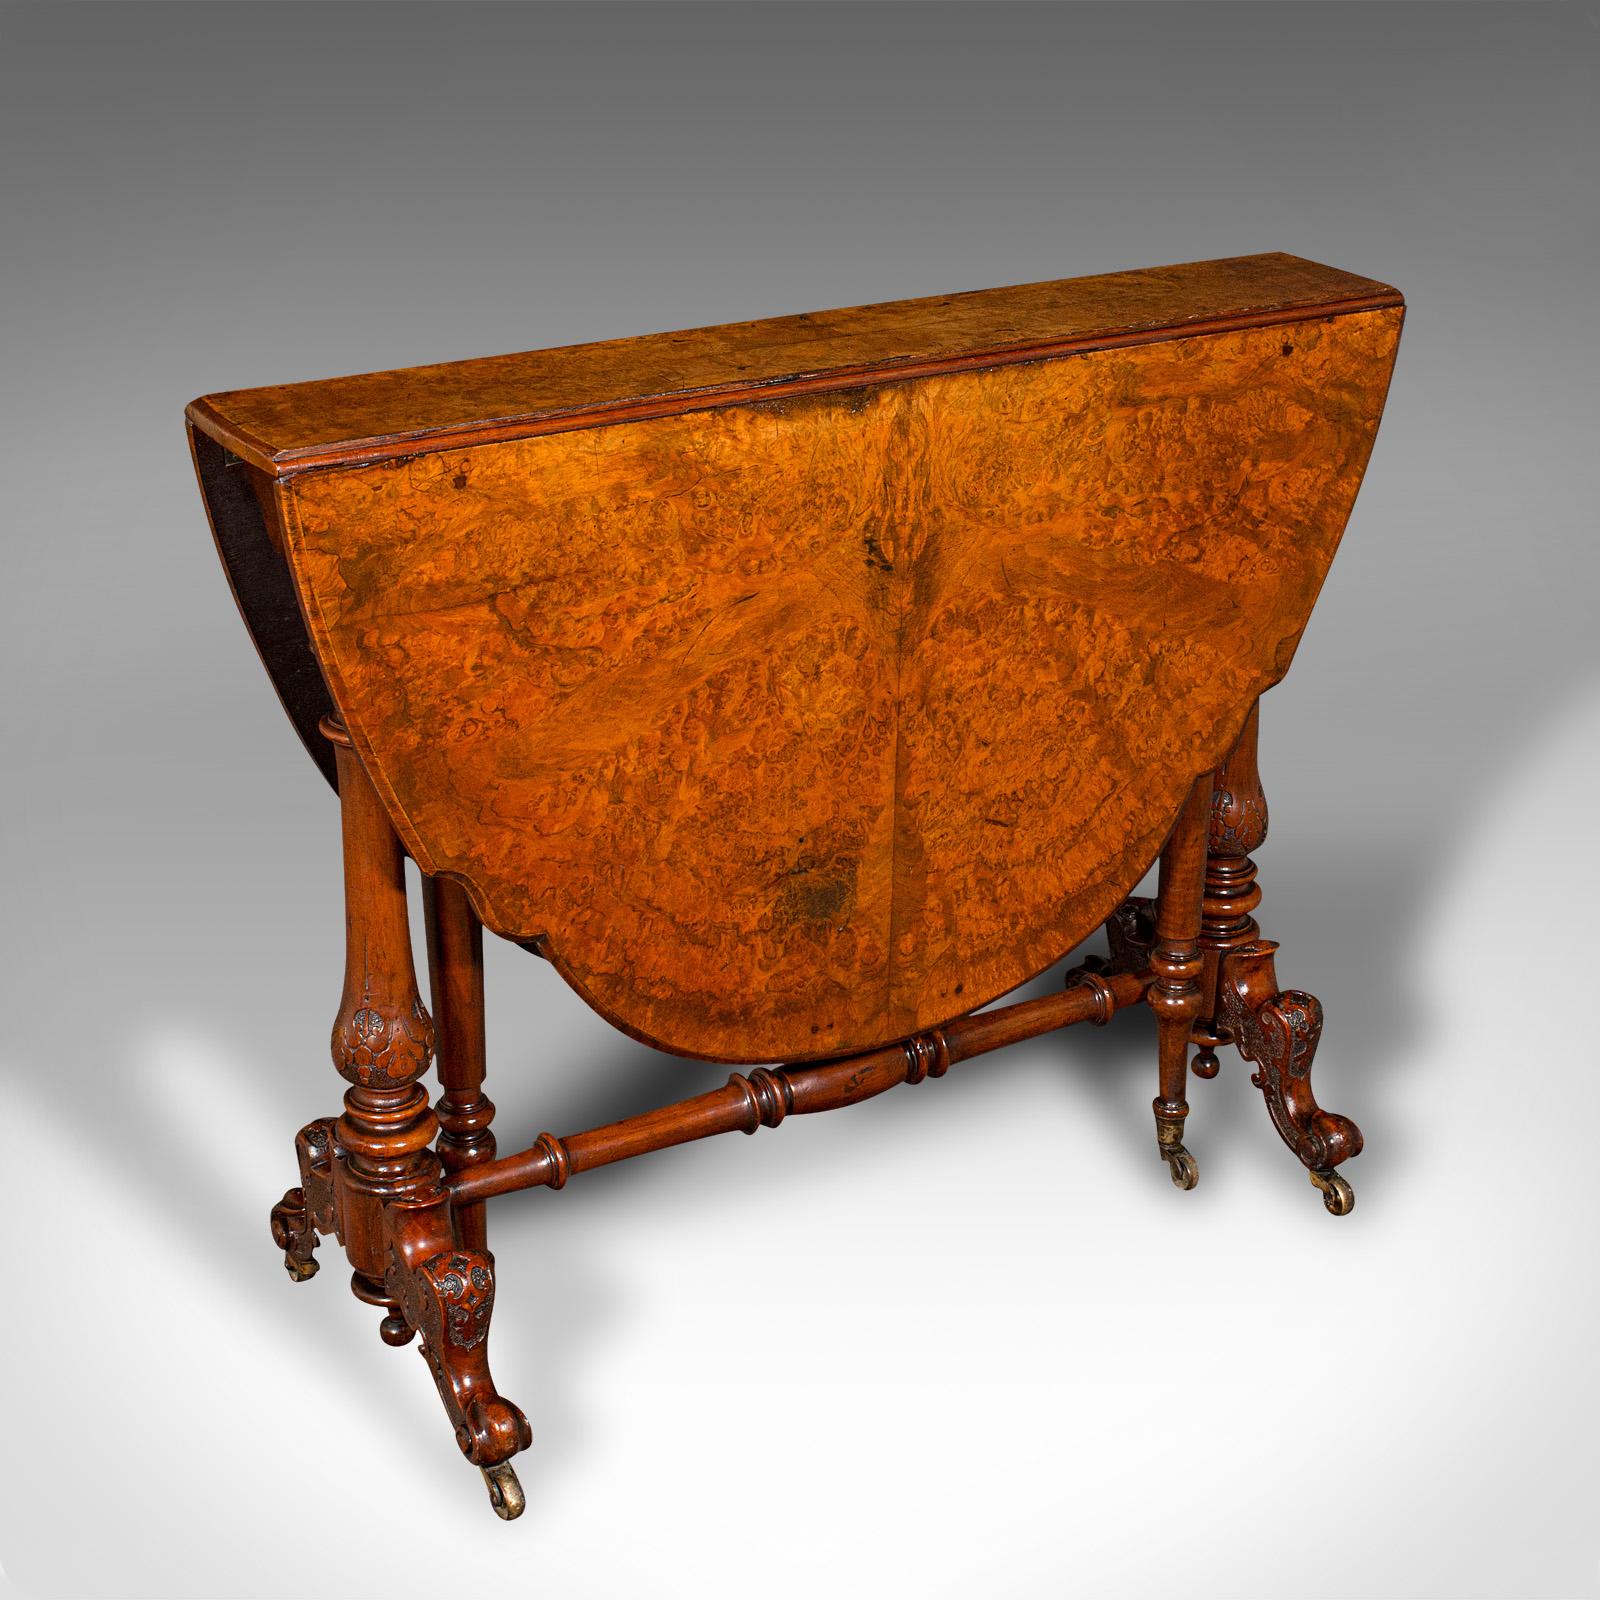 This is an antique Sutherland table. An English, burr walnut gate-leg 4-seat occasional table, dating to the early Victorian period, circa 1840.

Impressively figured oval table in the traditional Sutherland form
Displays a desirable aged patina and